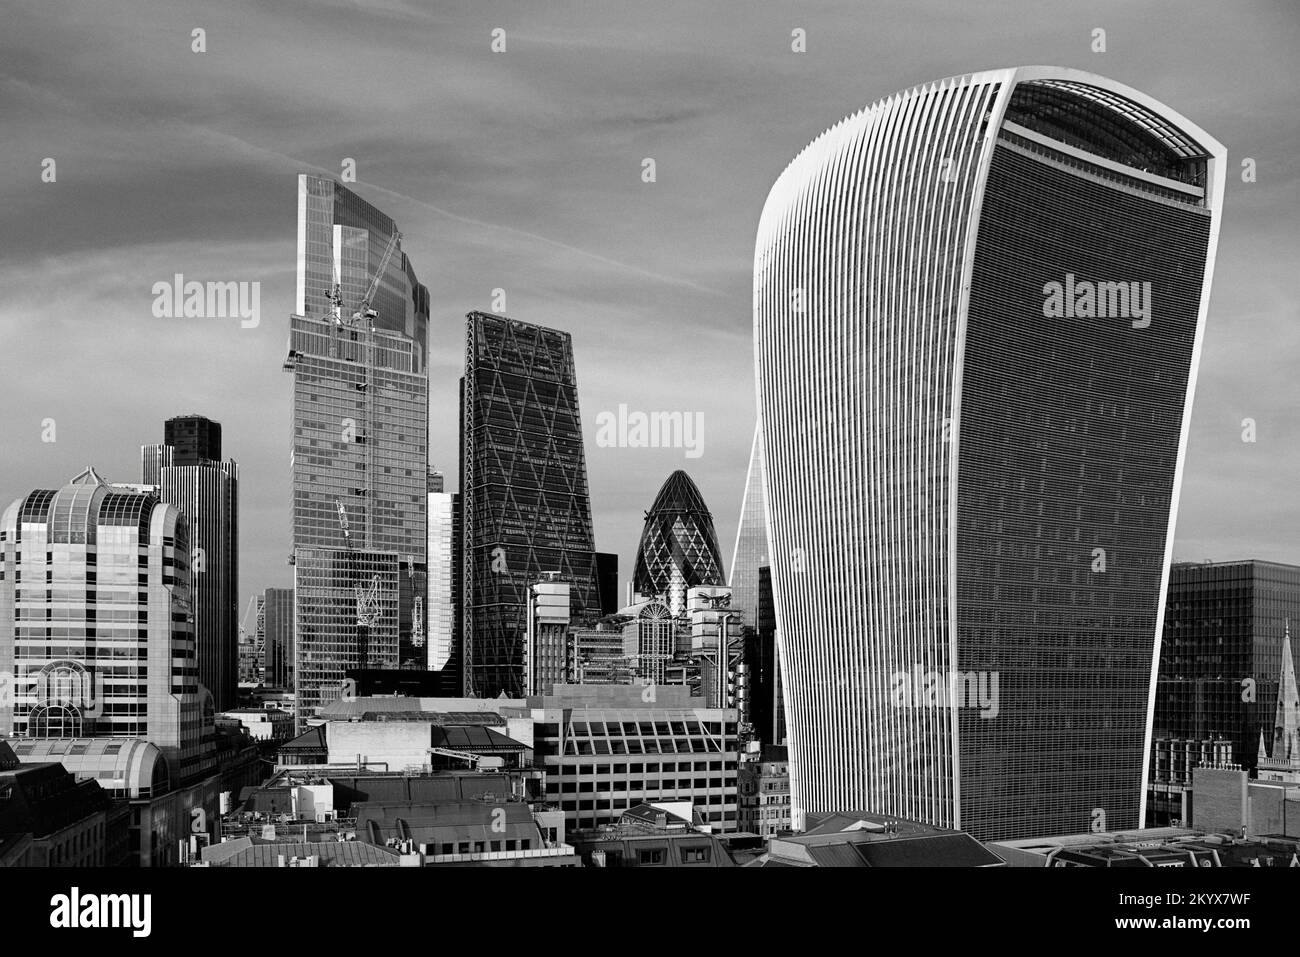 The City of London skyline viewed from the Monument, with the Walkie Talkie Tower, the Leadenhall Building, the Gherkin and the NatWest Tower. Stock Photo